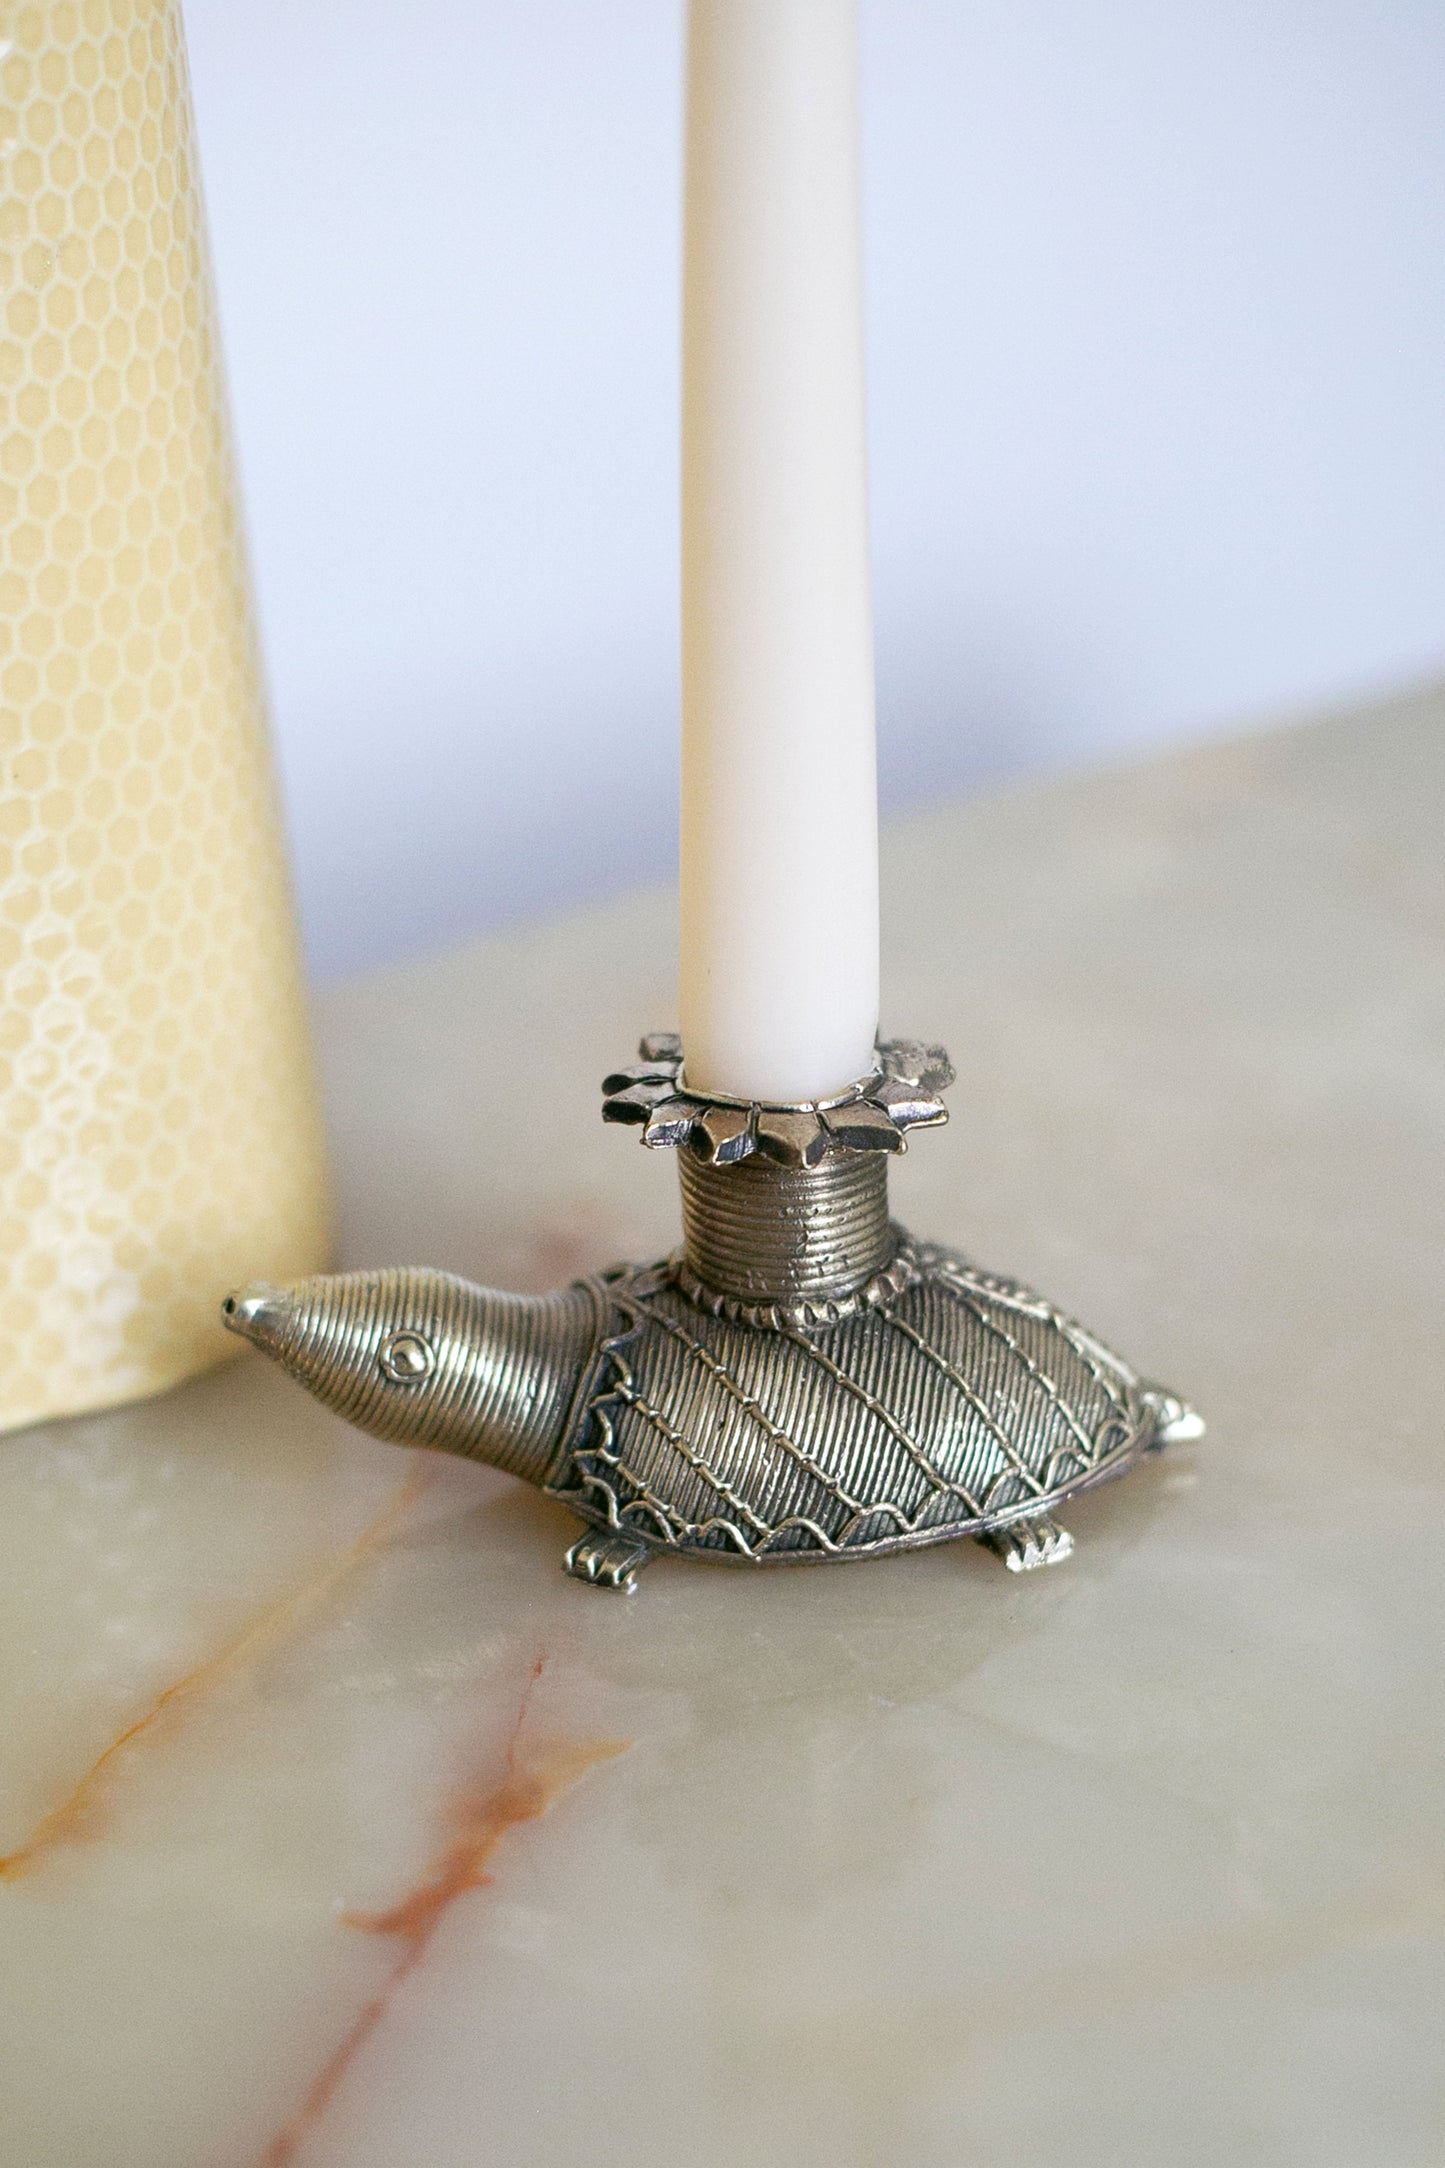 Authentic Dhokra Casted Tortoise Candle Holder Made by Tribal Artisan